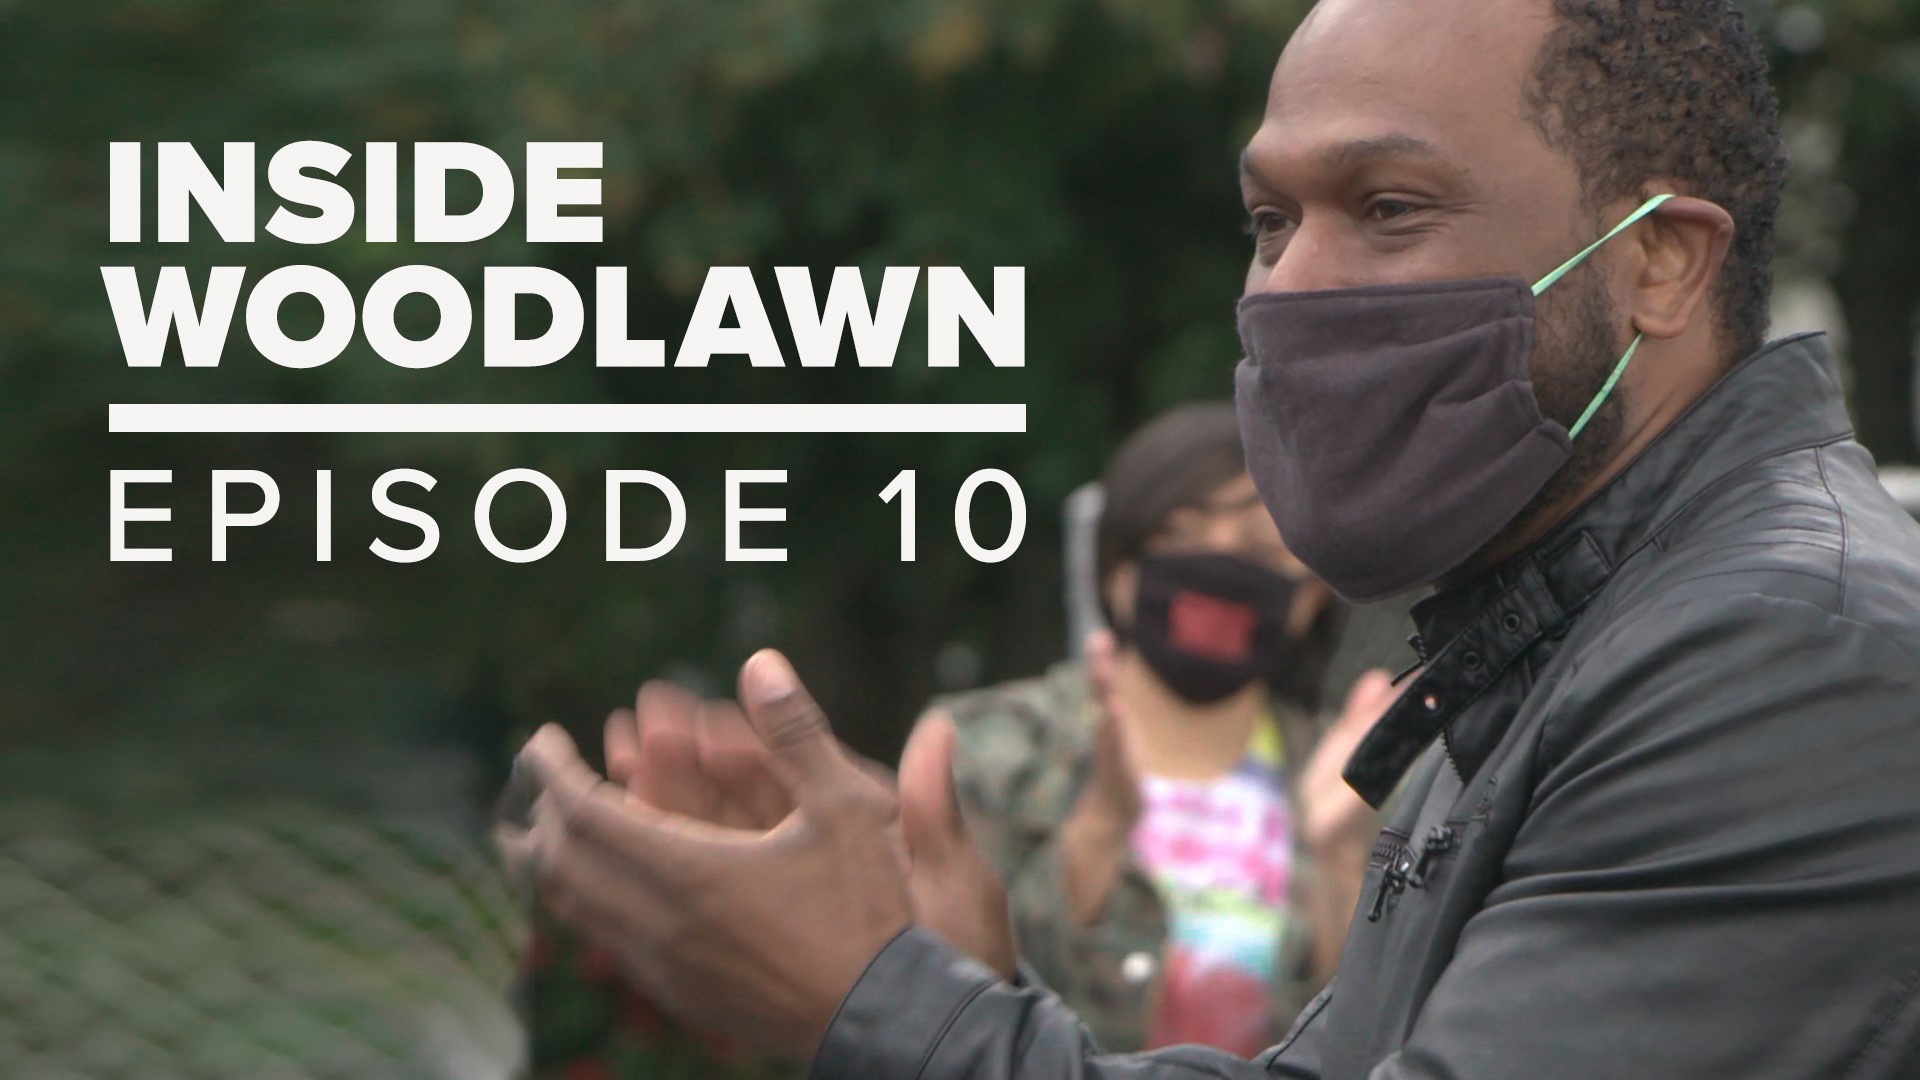 Inside Woodlawn Episode 10 looks at the lasting impact teachers have on their students as the school year wraps up during a global pandemic. 
Woodlawn 5th graders Be